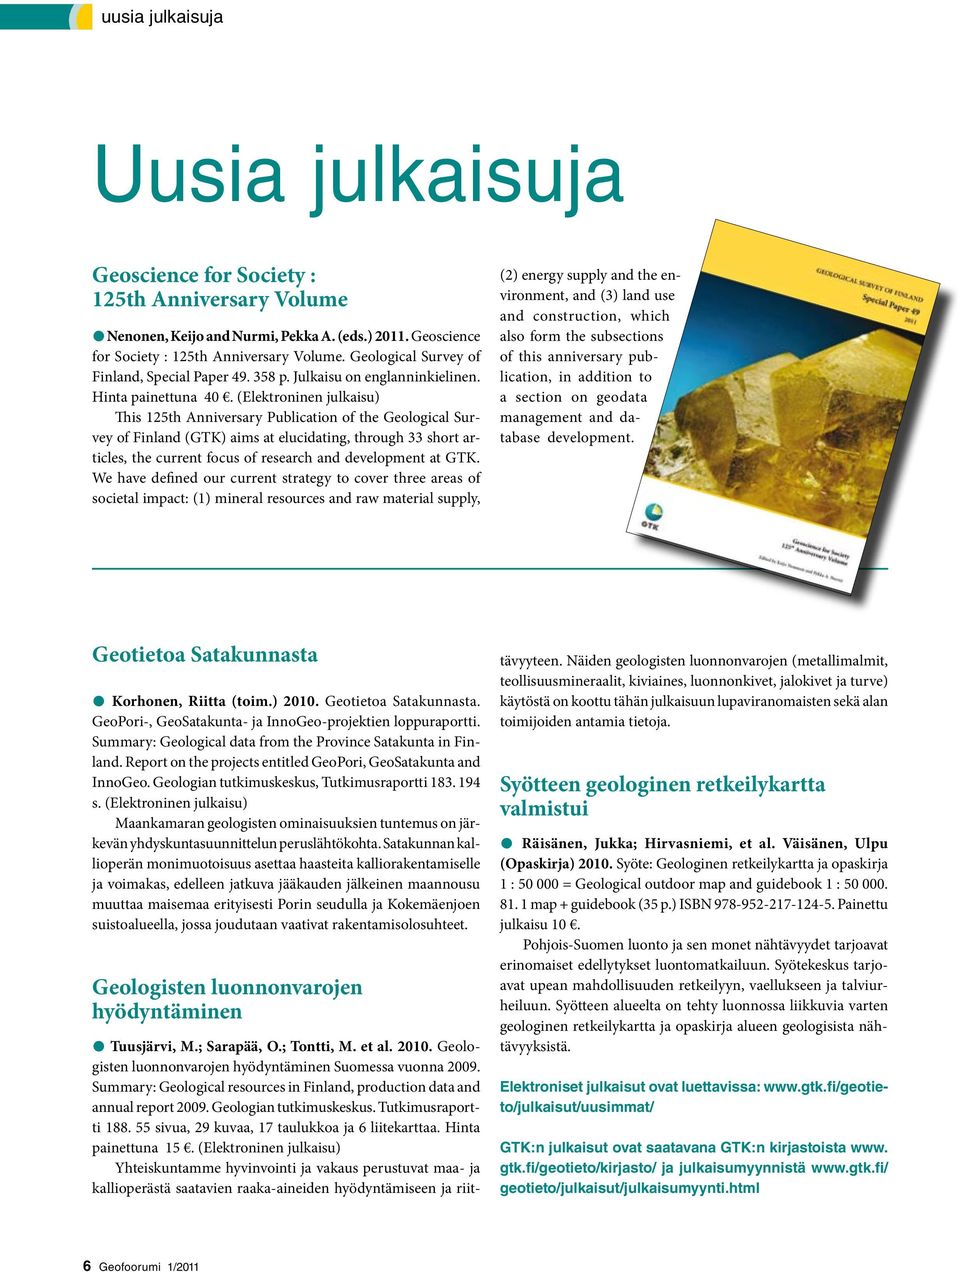 (Elektroninen julkaisu) This 125th Anniversary Publication of the Geological Survey of Finland (GTK) aims at elucidating, through 33 short articles, the current focus of research and development at